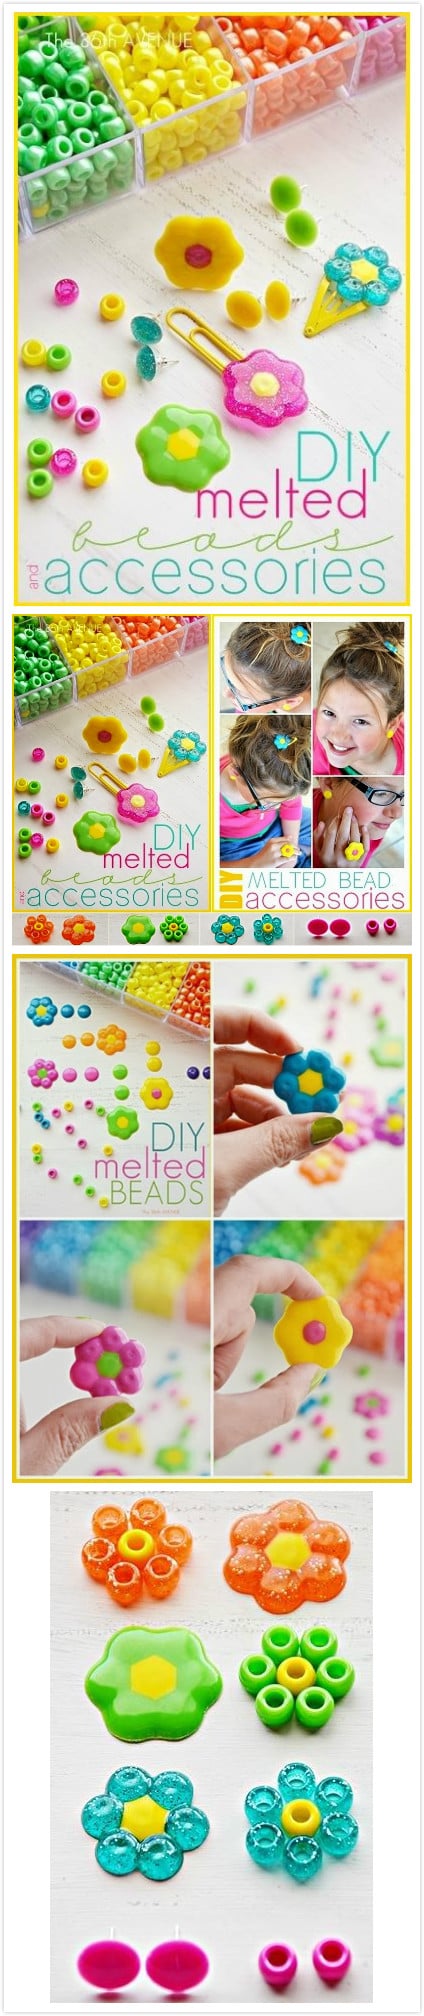 How to DIY Melted Beads Accessories